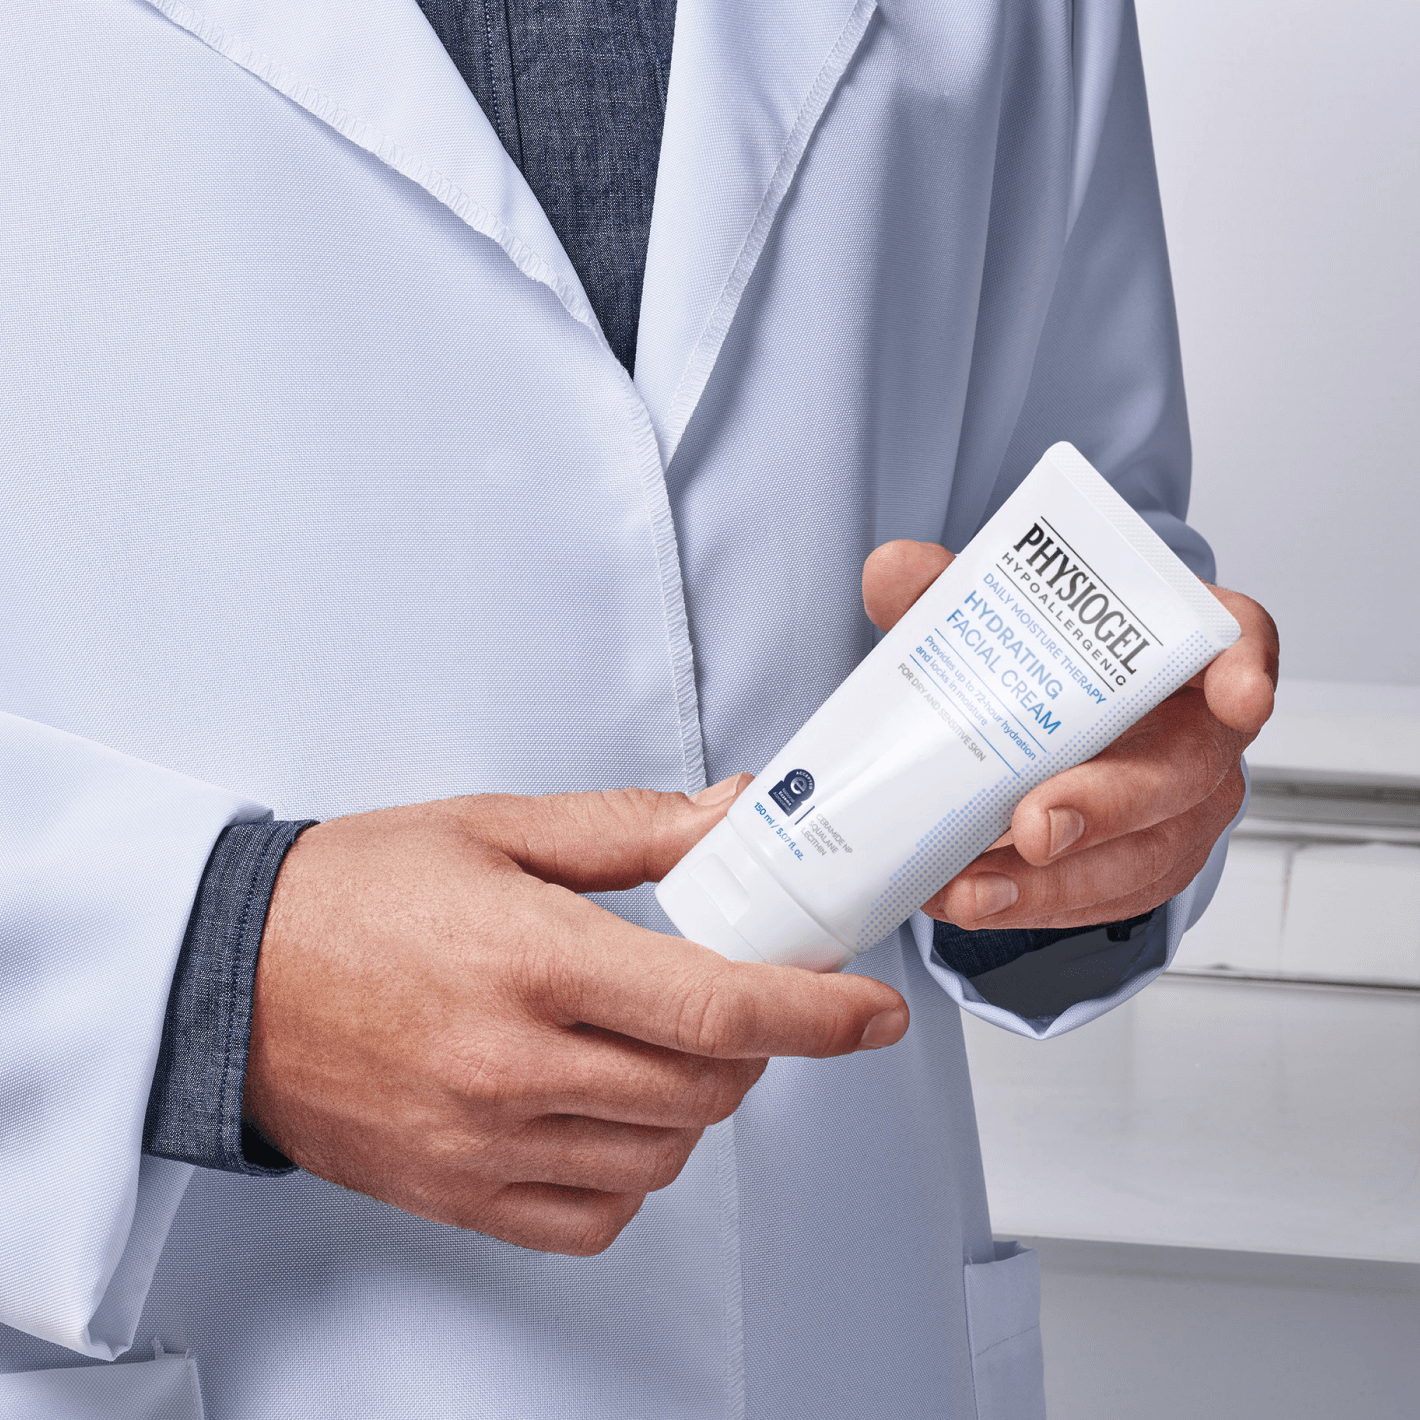 A person in a lab coat holds a tube of Physiogel Hypoallergenic Daily Moisture Therapy facial cream.